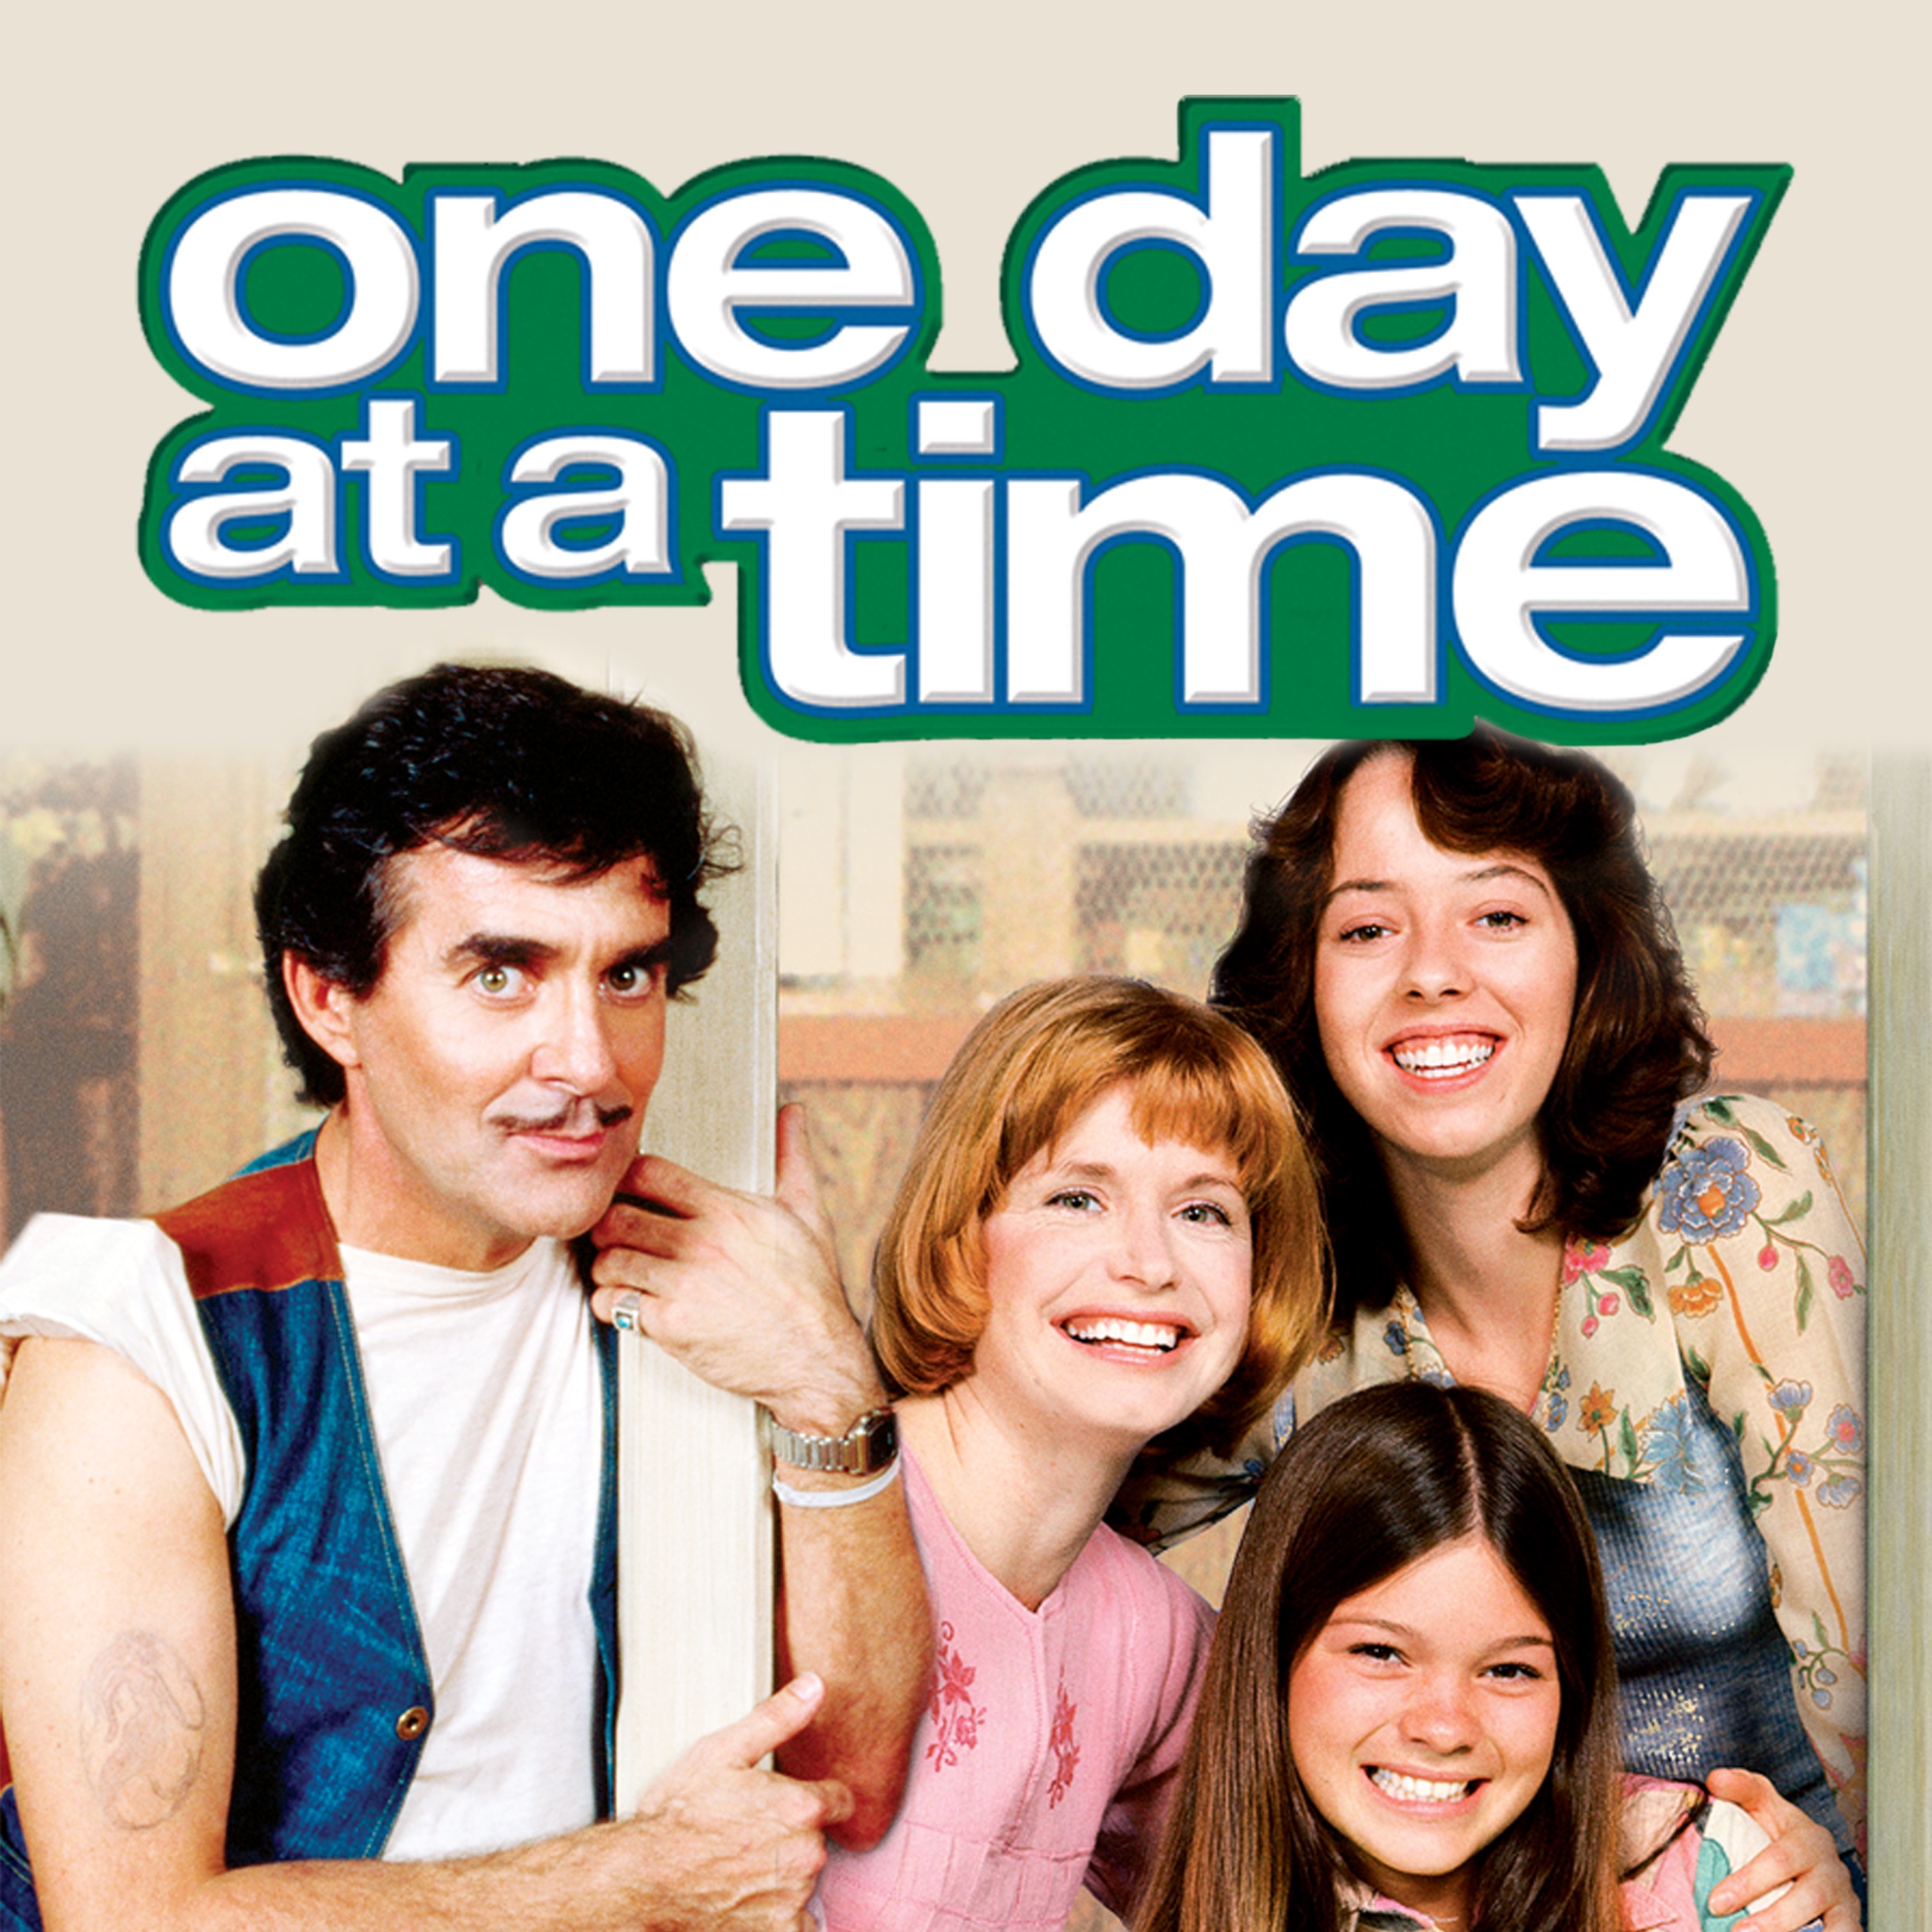 one day at a time season 4 netflix